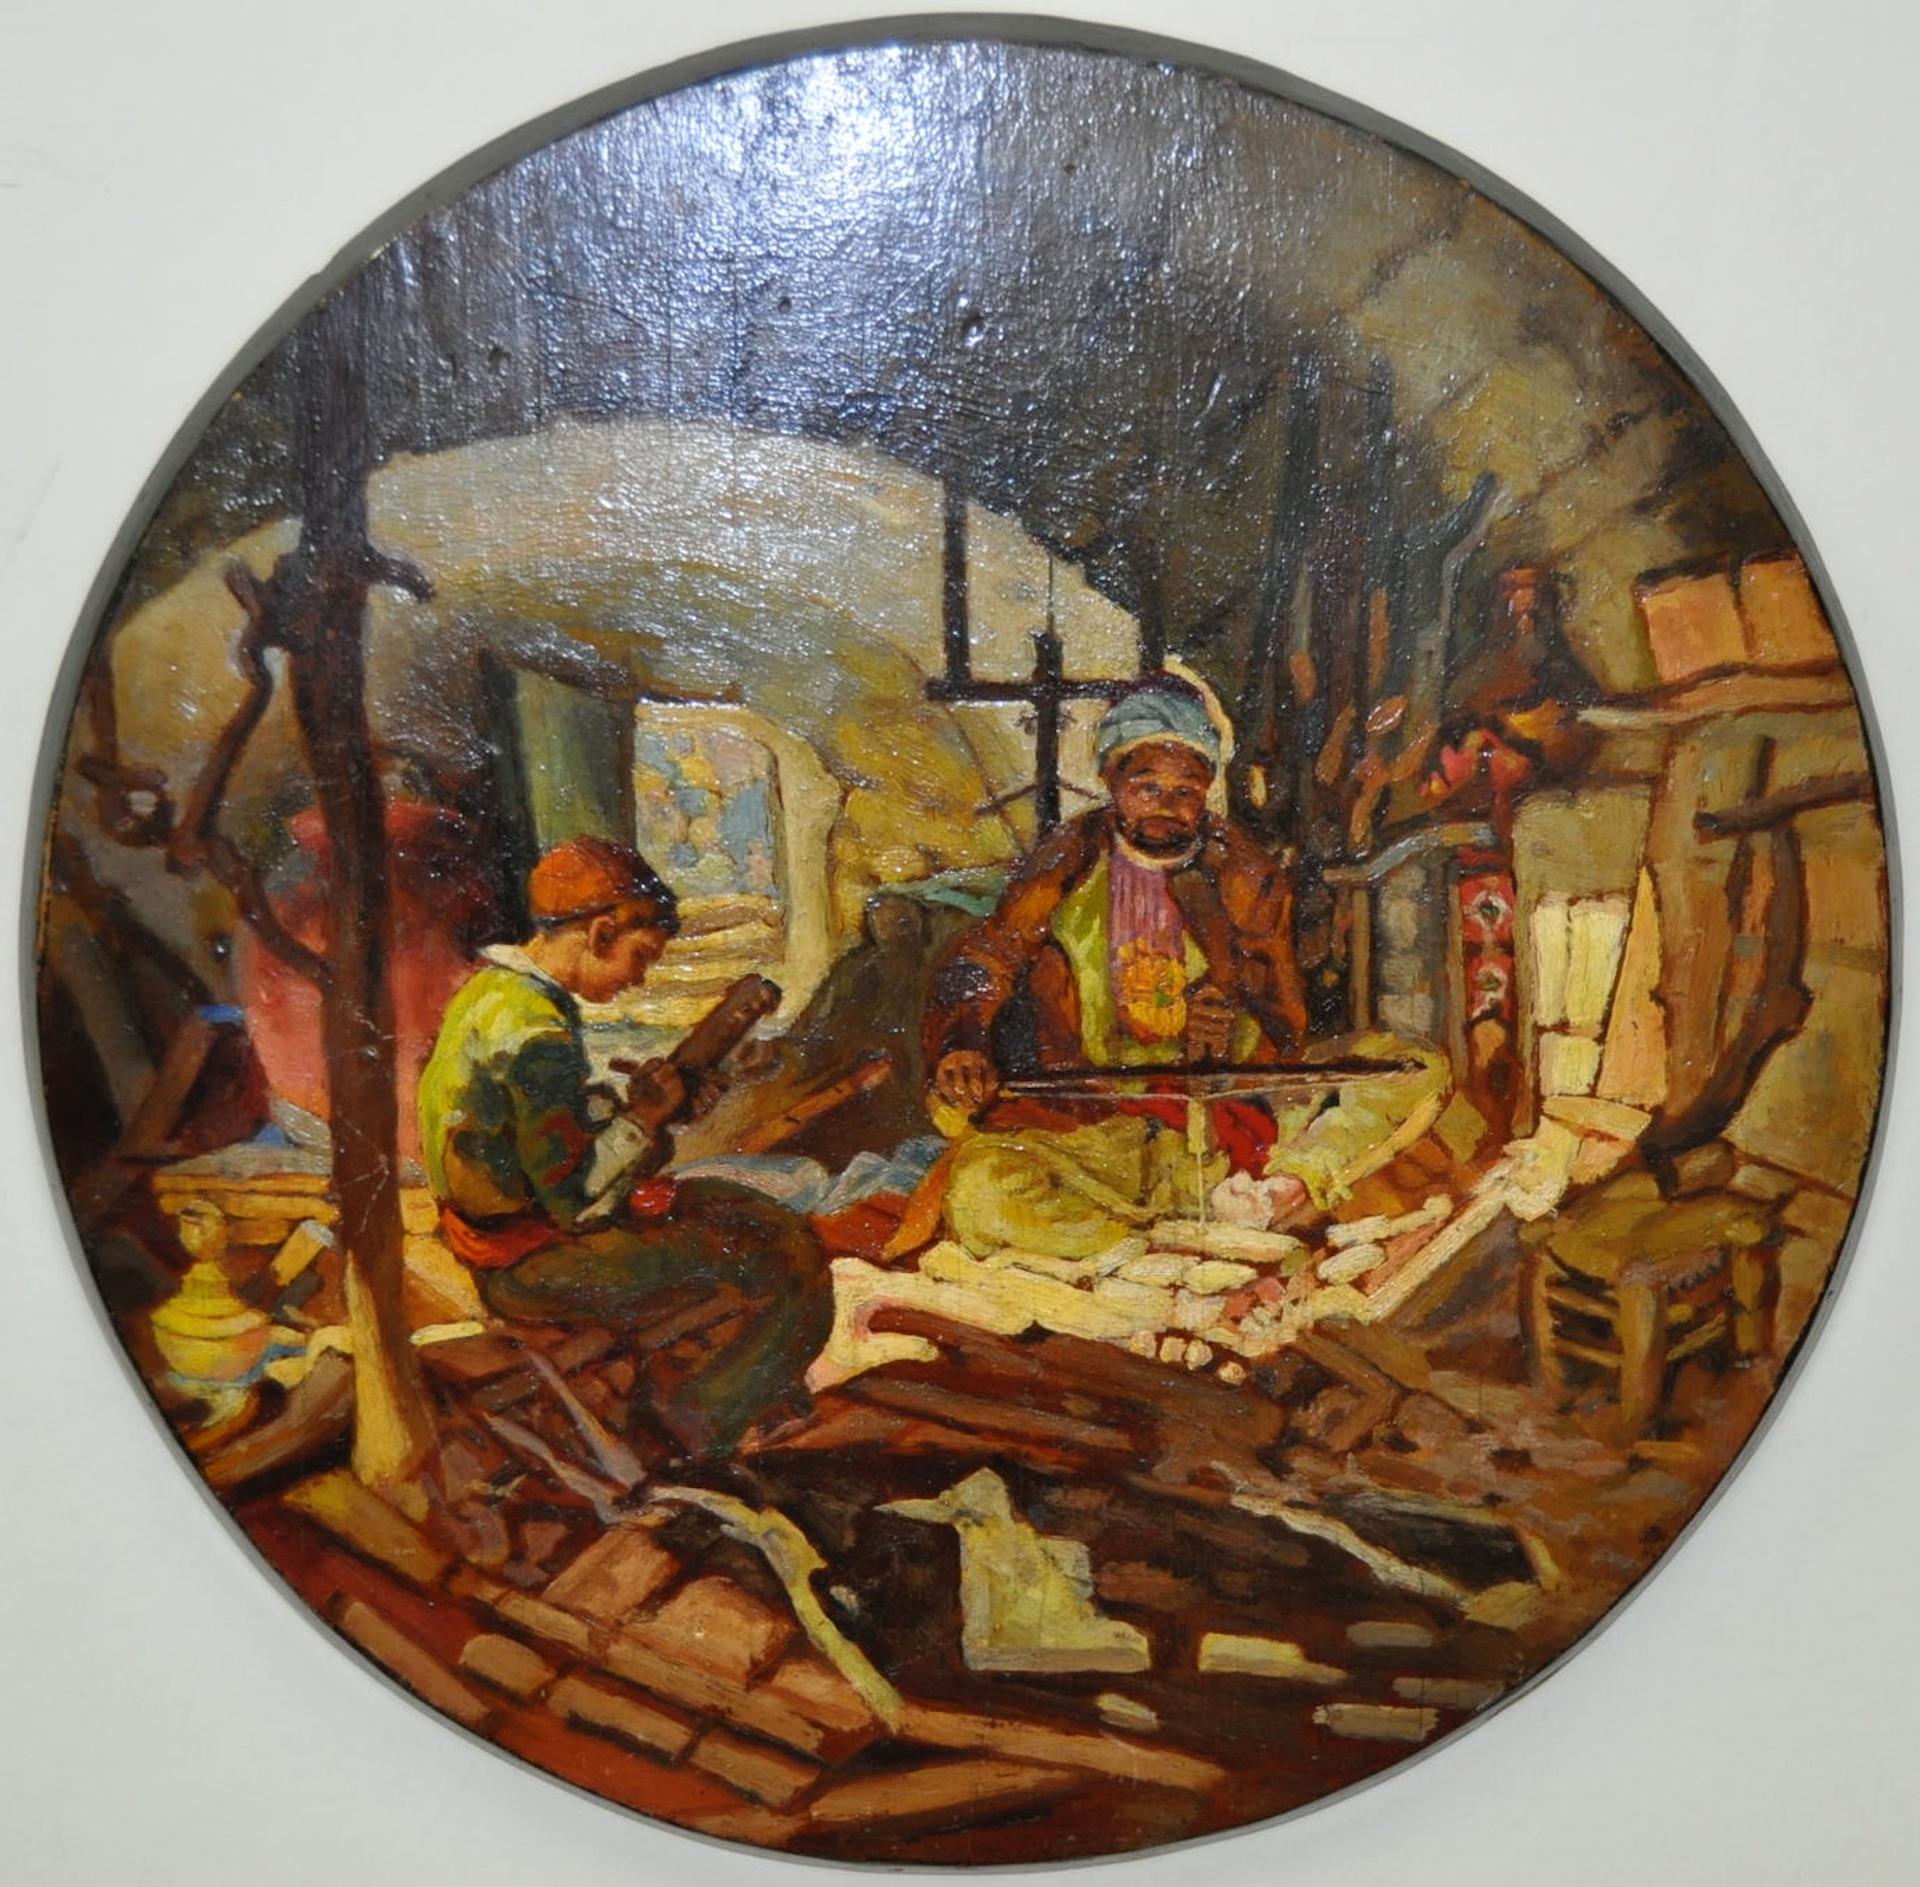 Pair of French Morocco paintings, circa 1940

Oil on wood. Very good vintage condition.

Each painting depicts a North African market scene.

Dimensions 13 inches diameter (each). 

This is a wonderful pair of paintings.

Offered as a